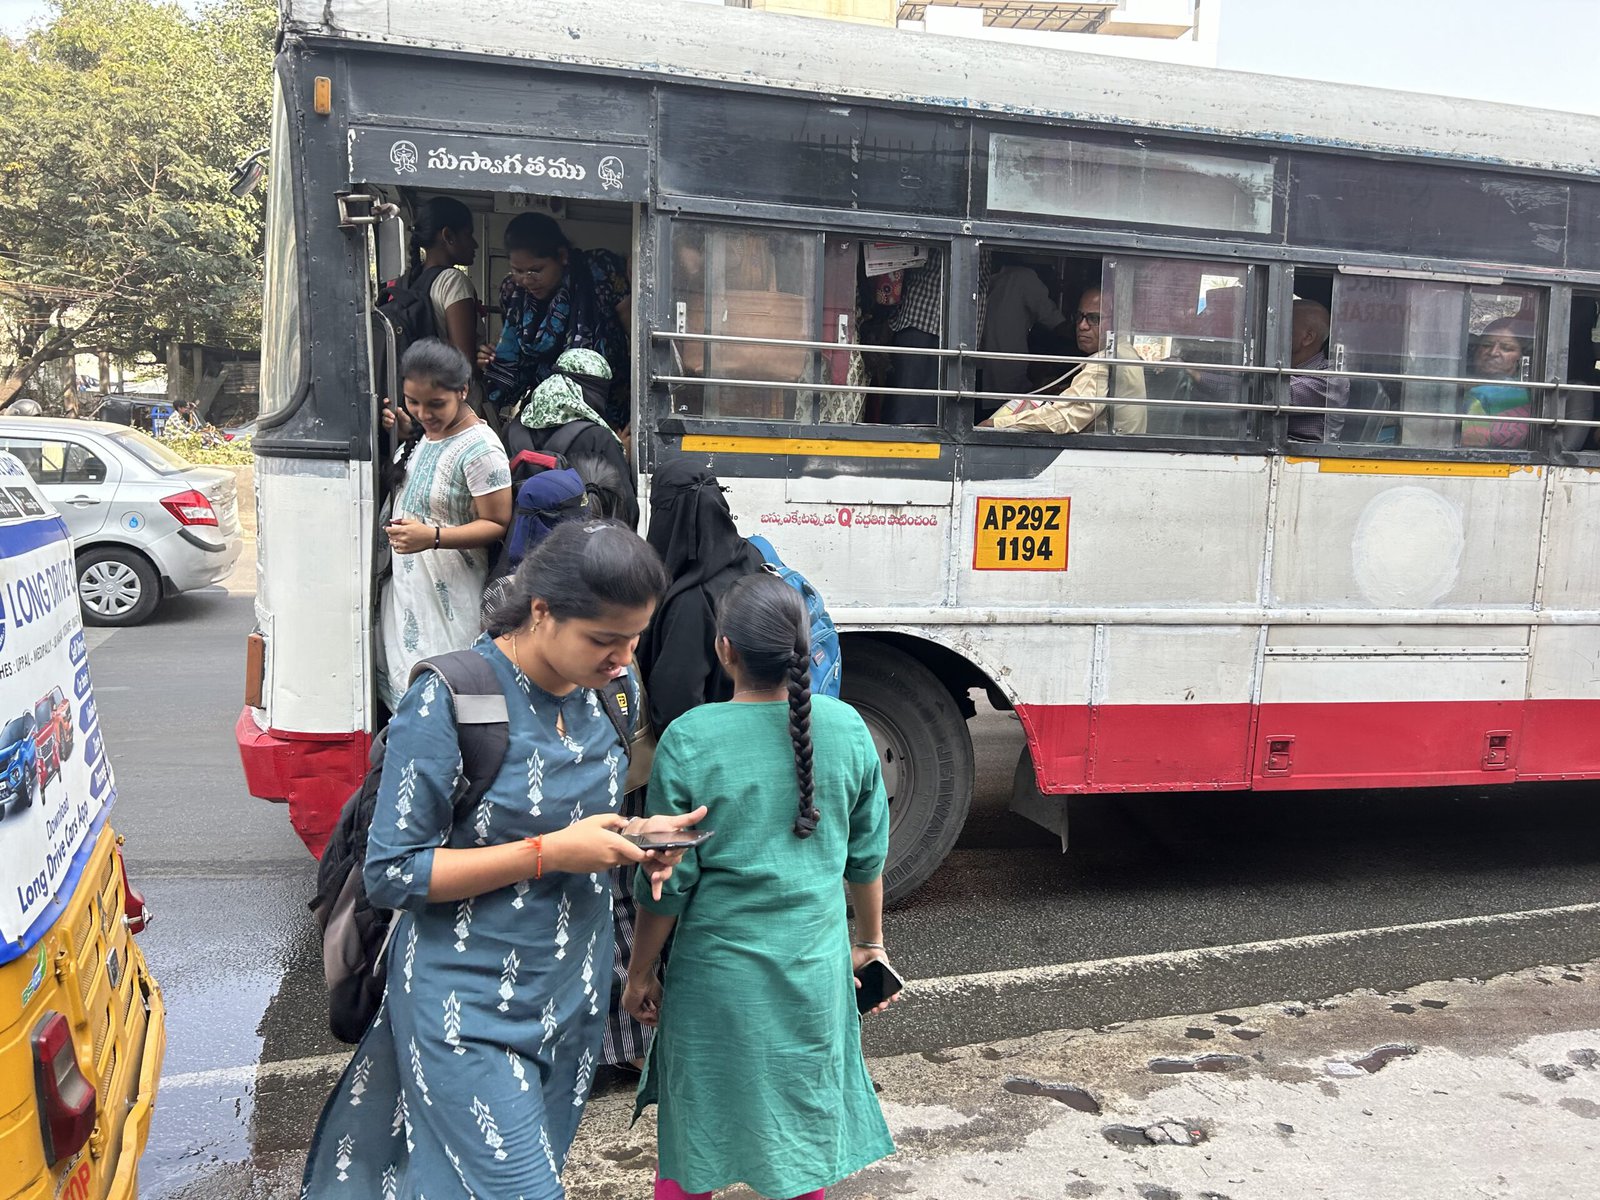 Female students boarding a bus.